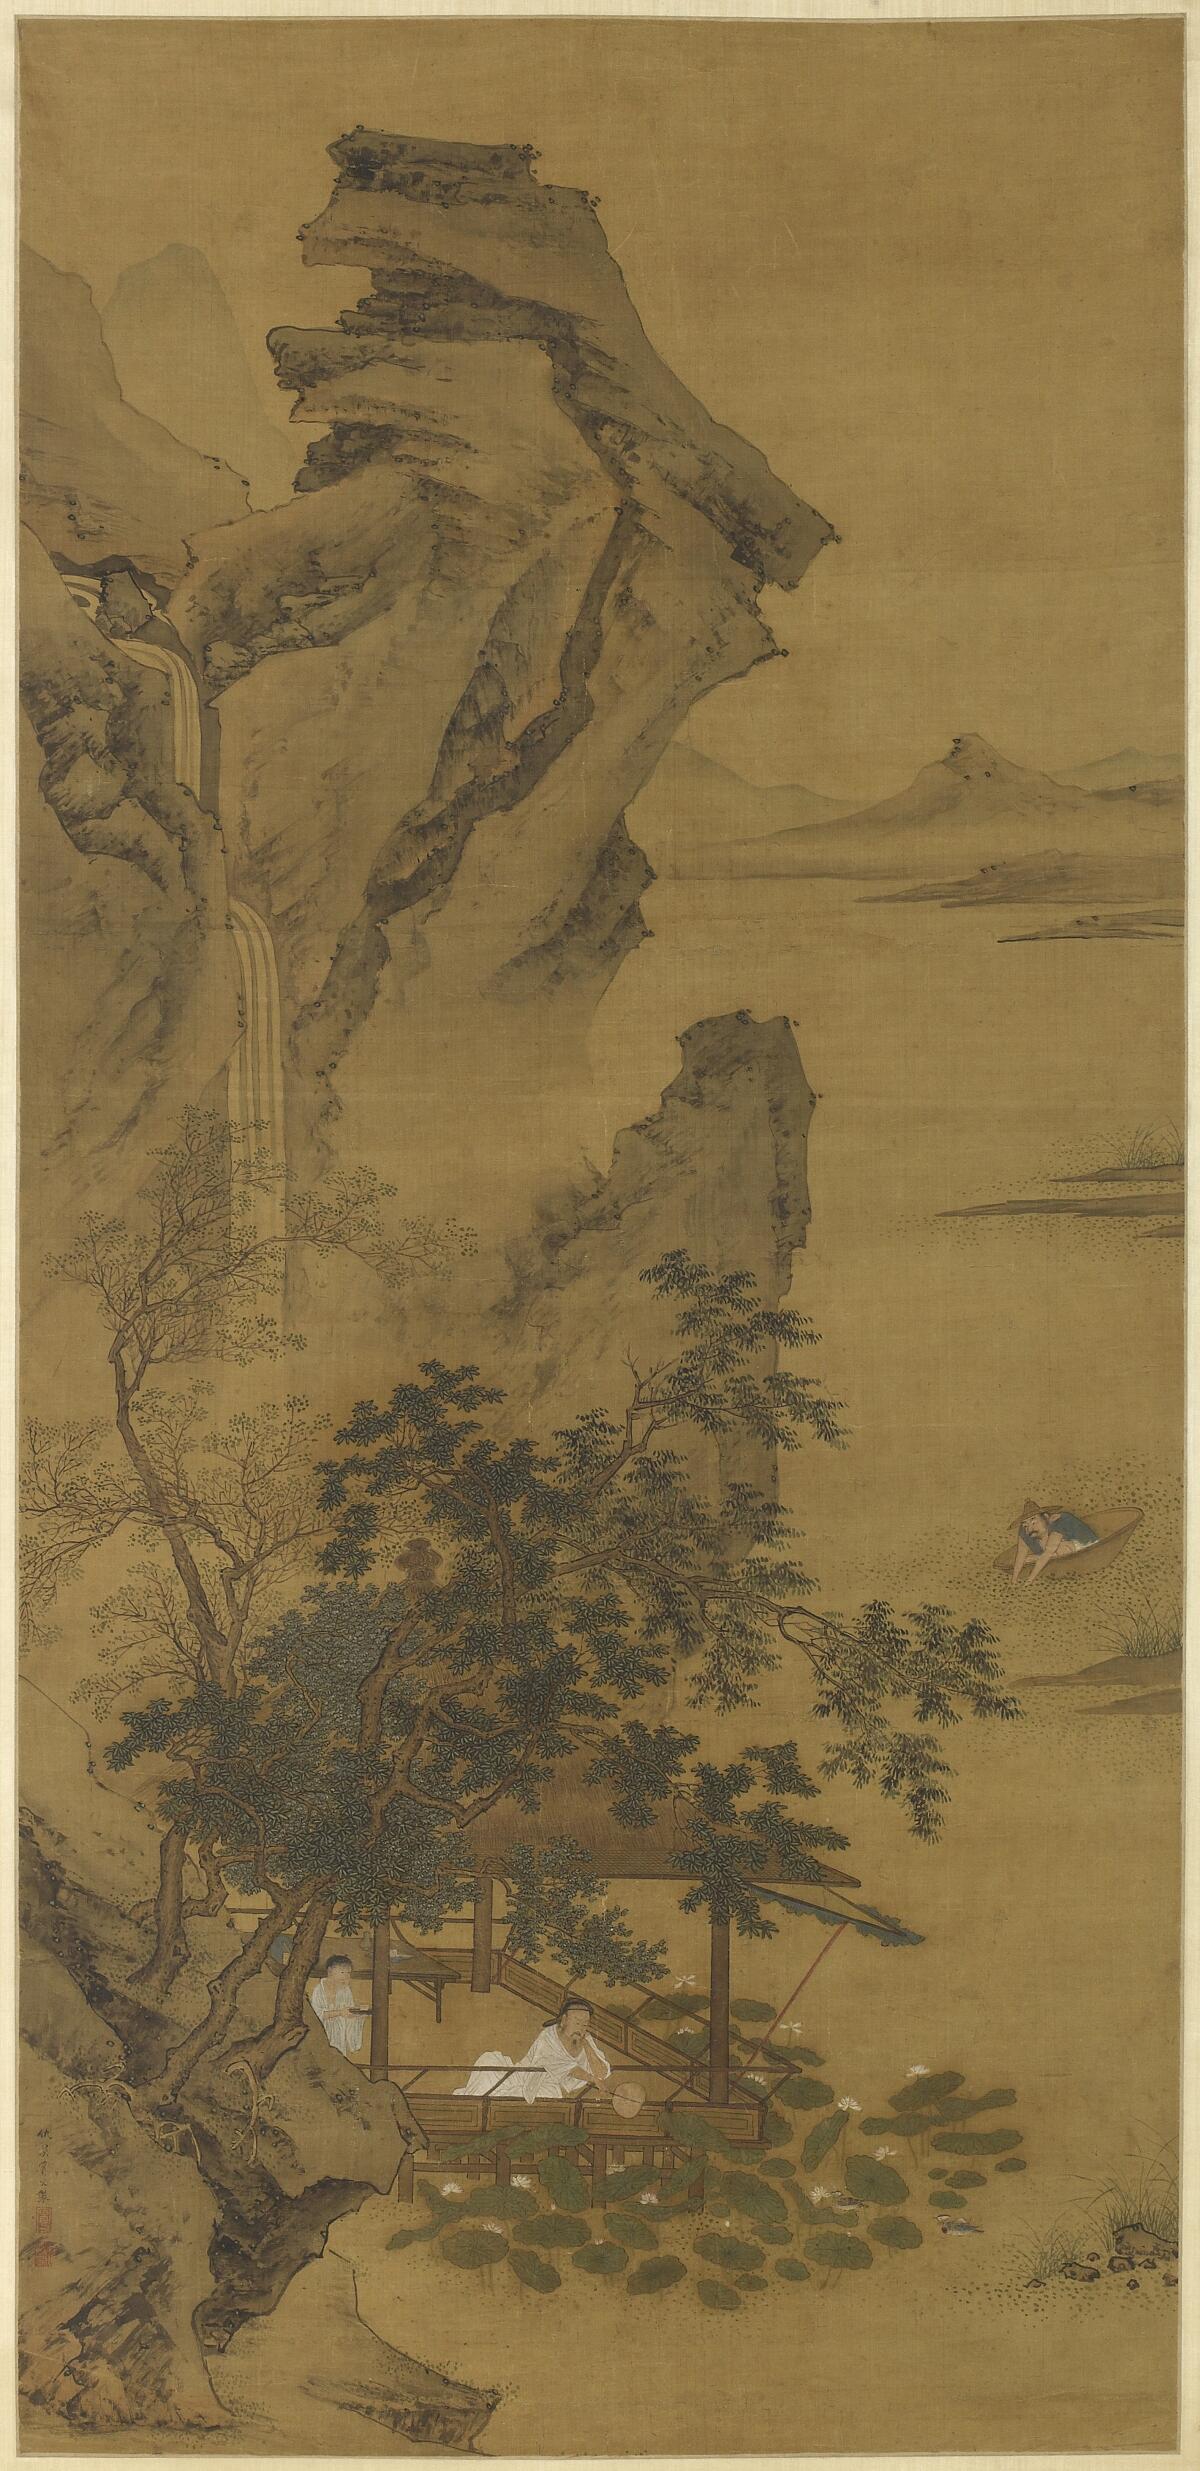 A painted scroll unfurled to show mountains and trees